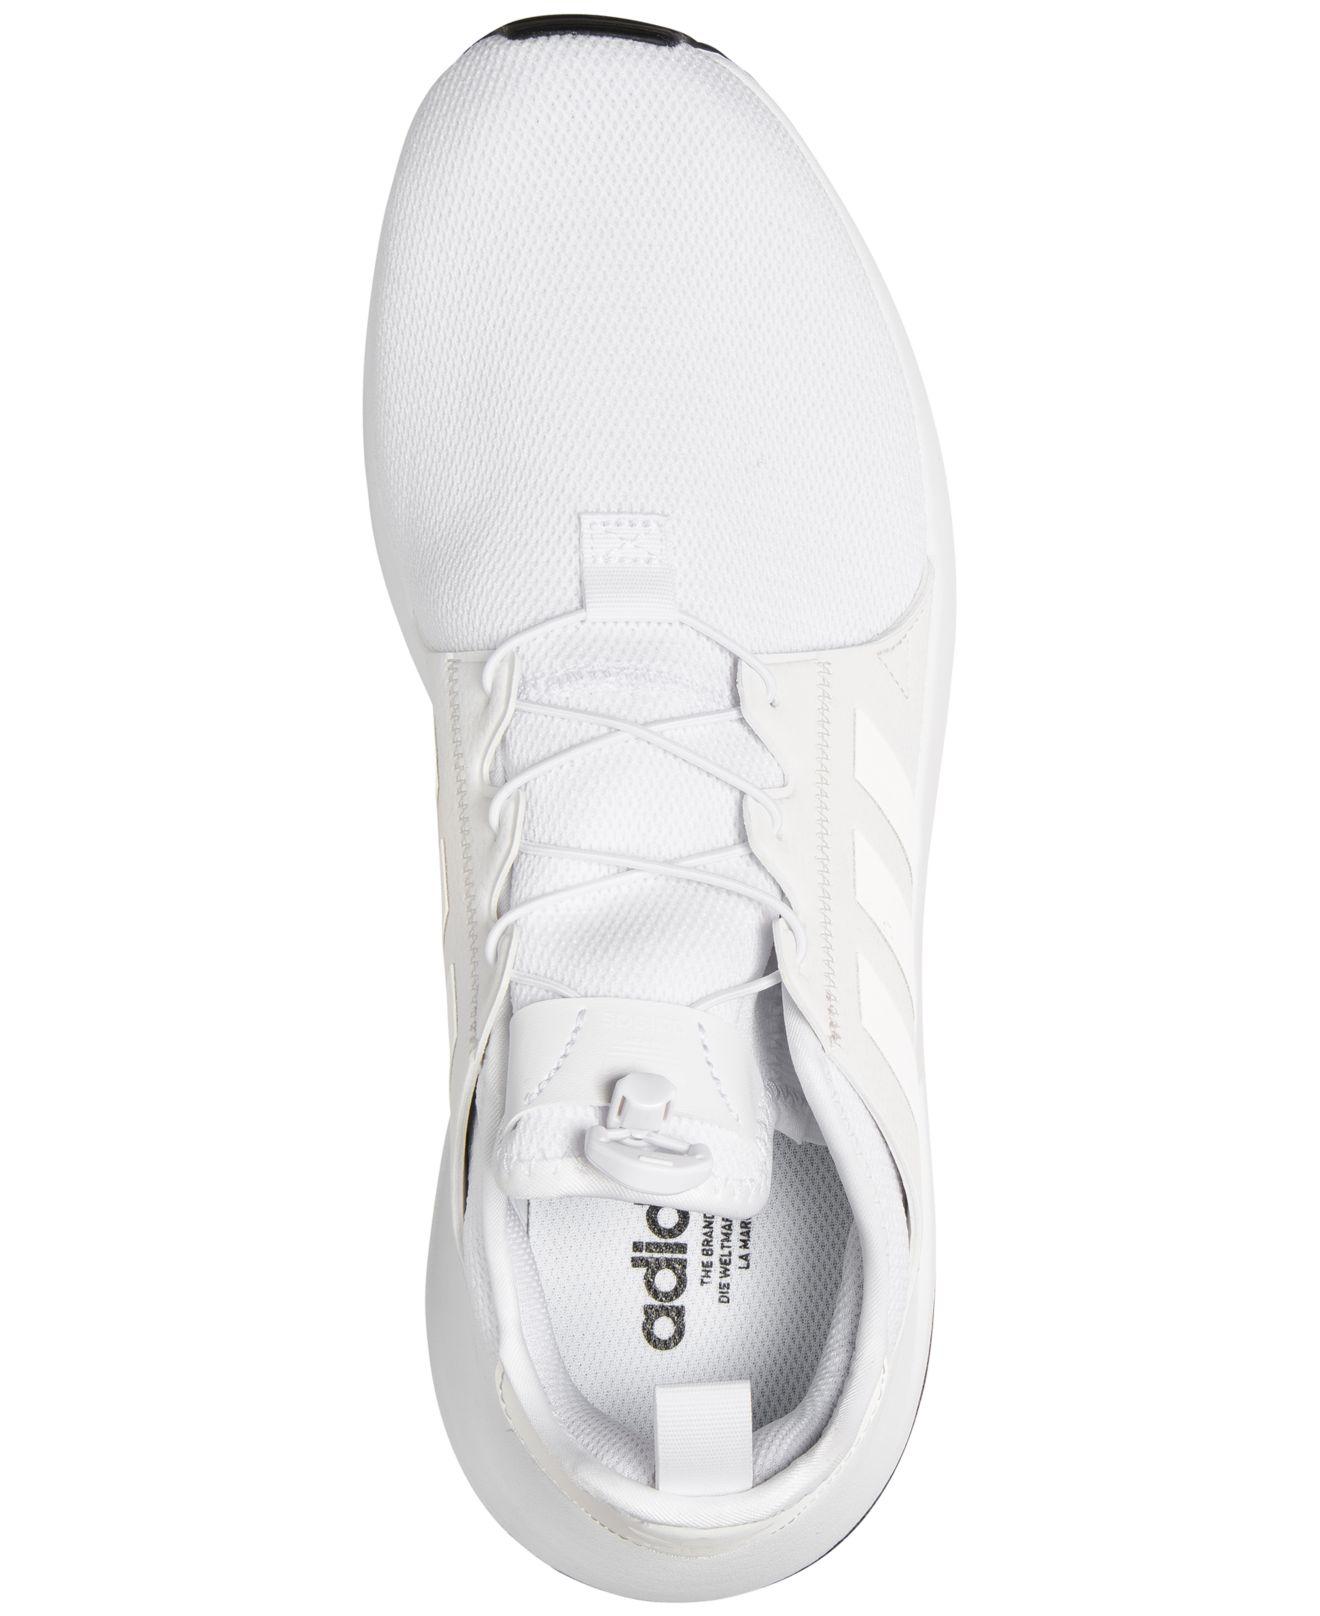 adidas men's xplorer casual sneakers from finish line